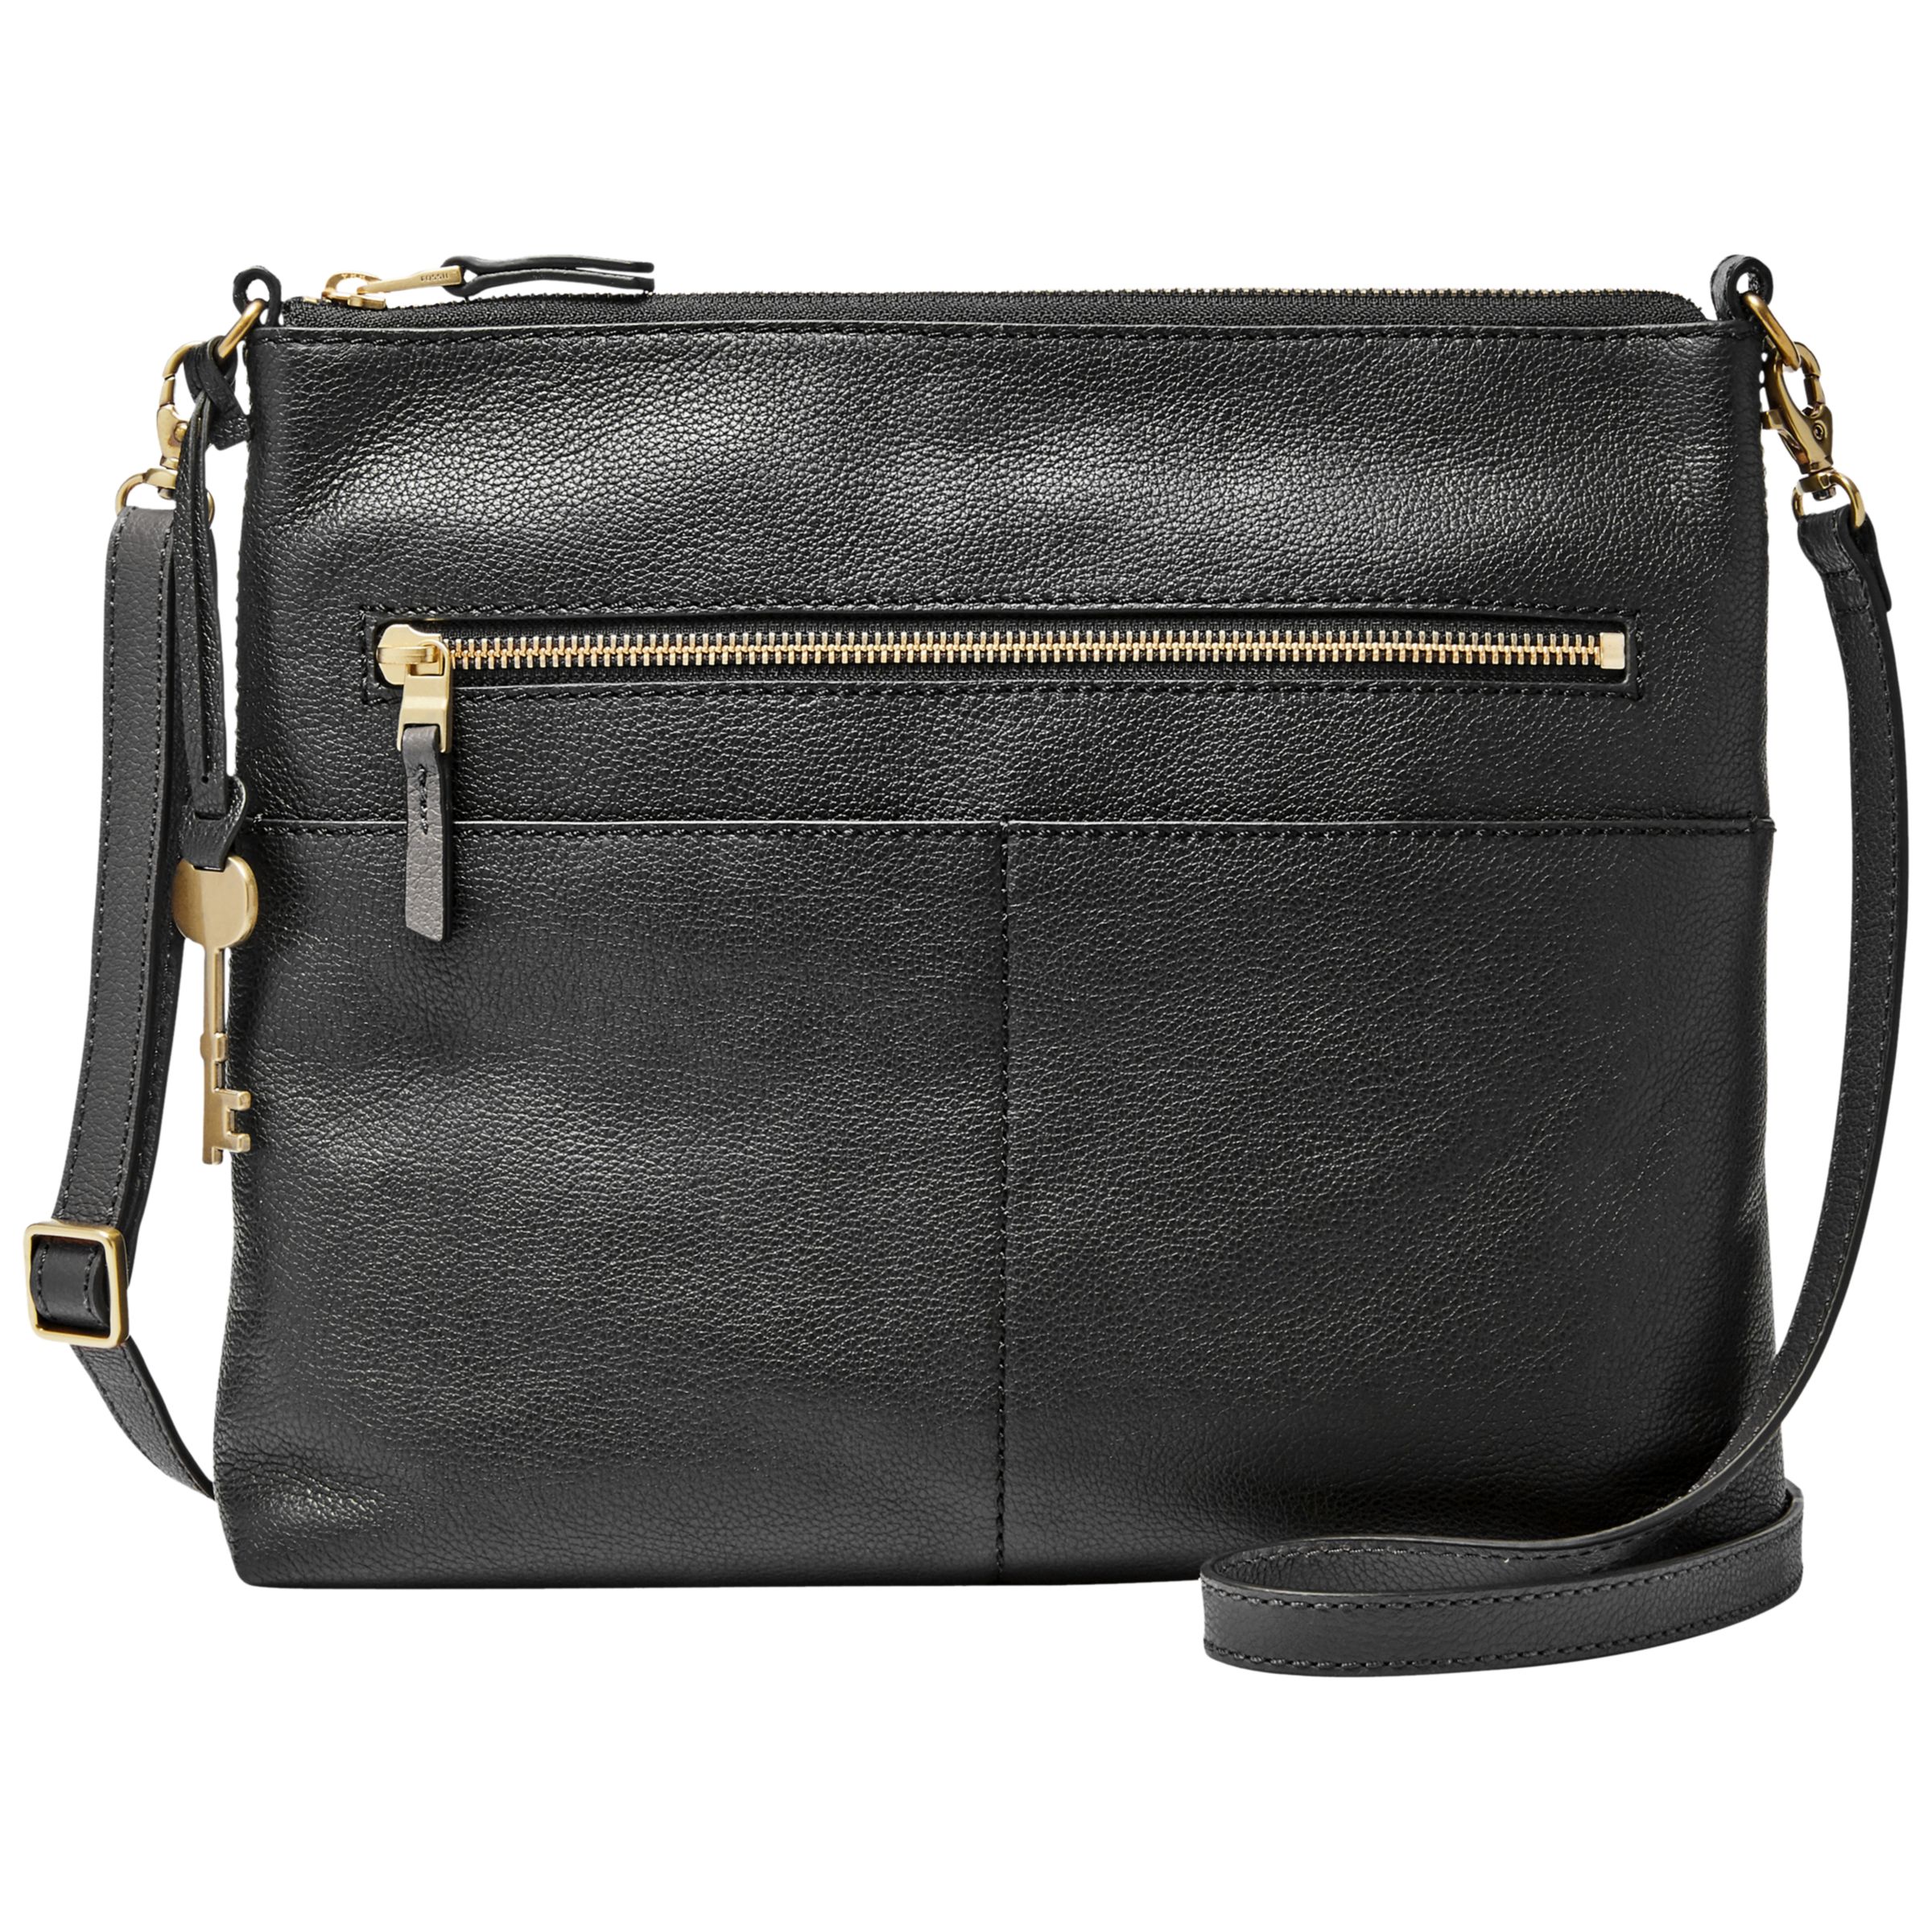 Fossil Fiona Leather Cross Body Bag